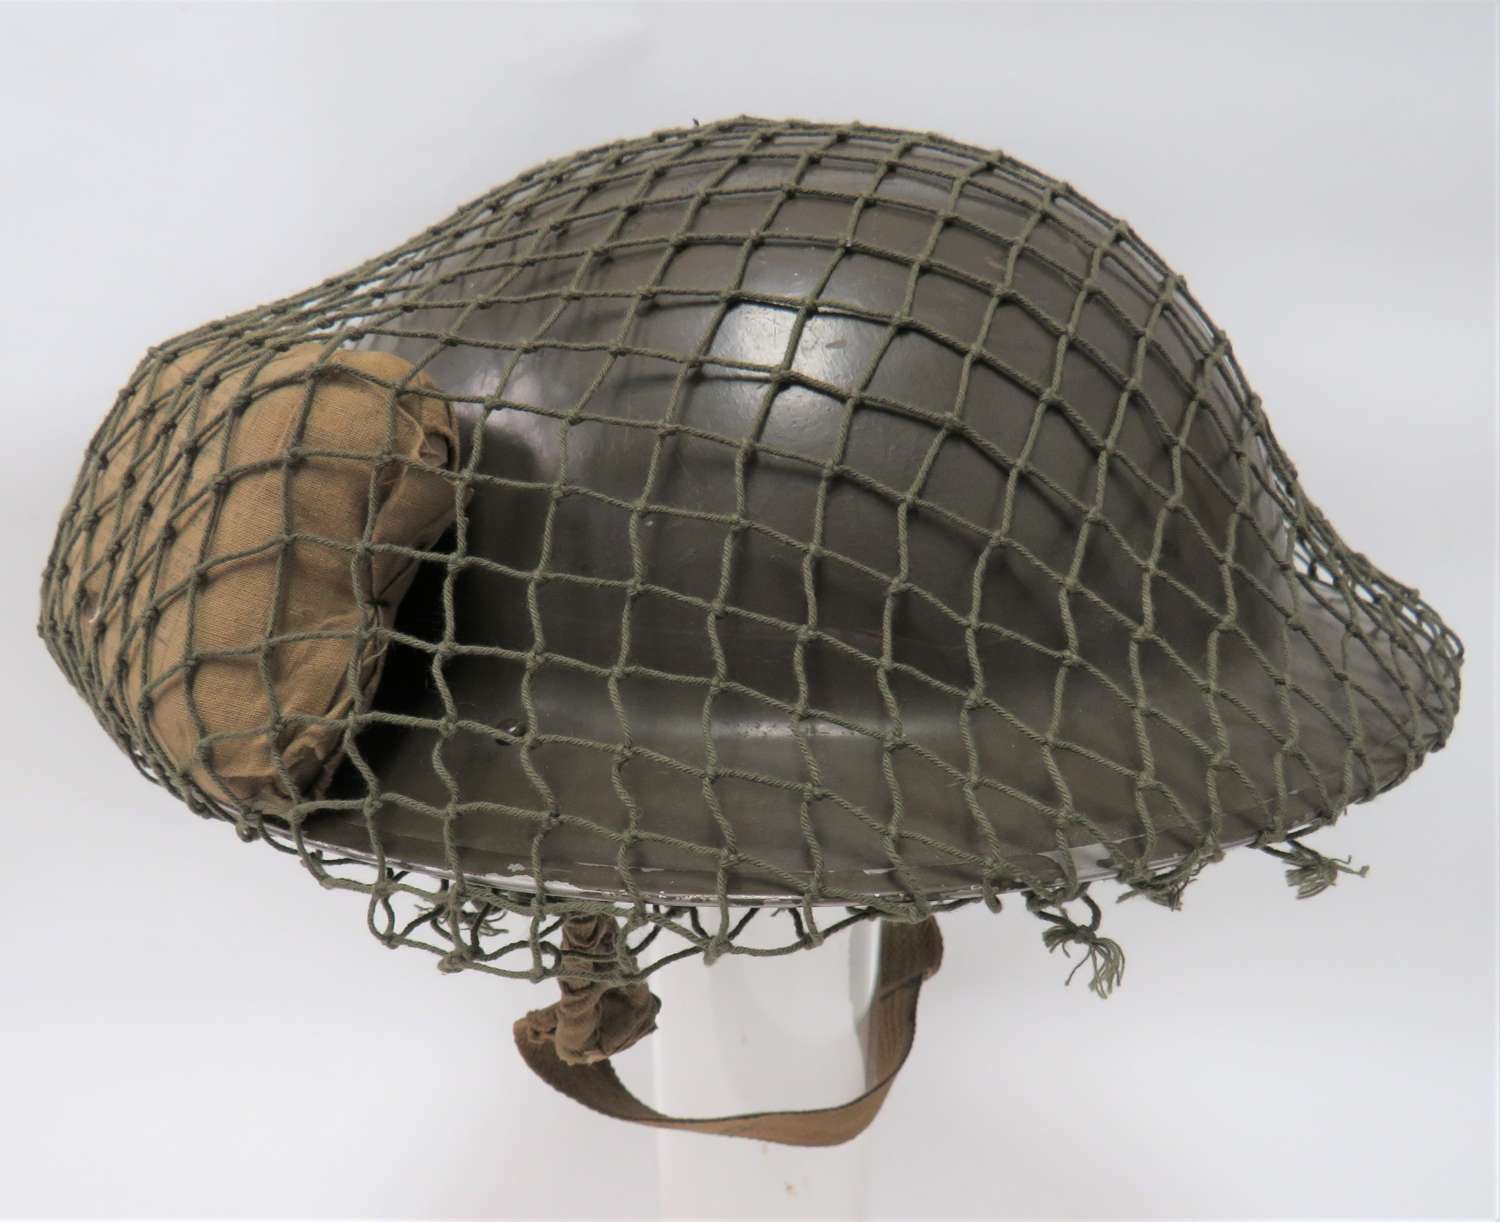 1938 Dated Steel Helmet and First Aid Dressing Typical for Dunkirk